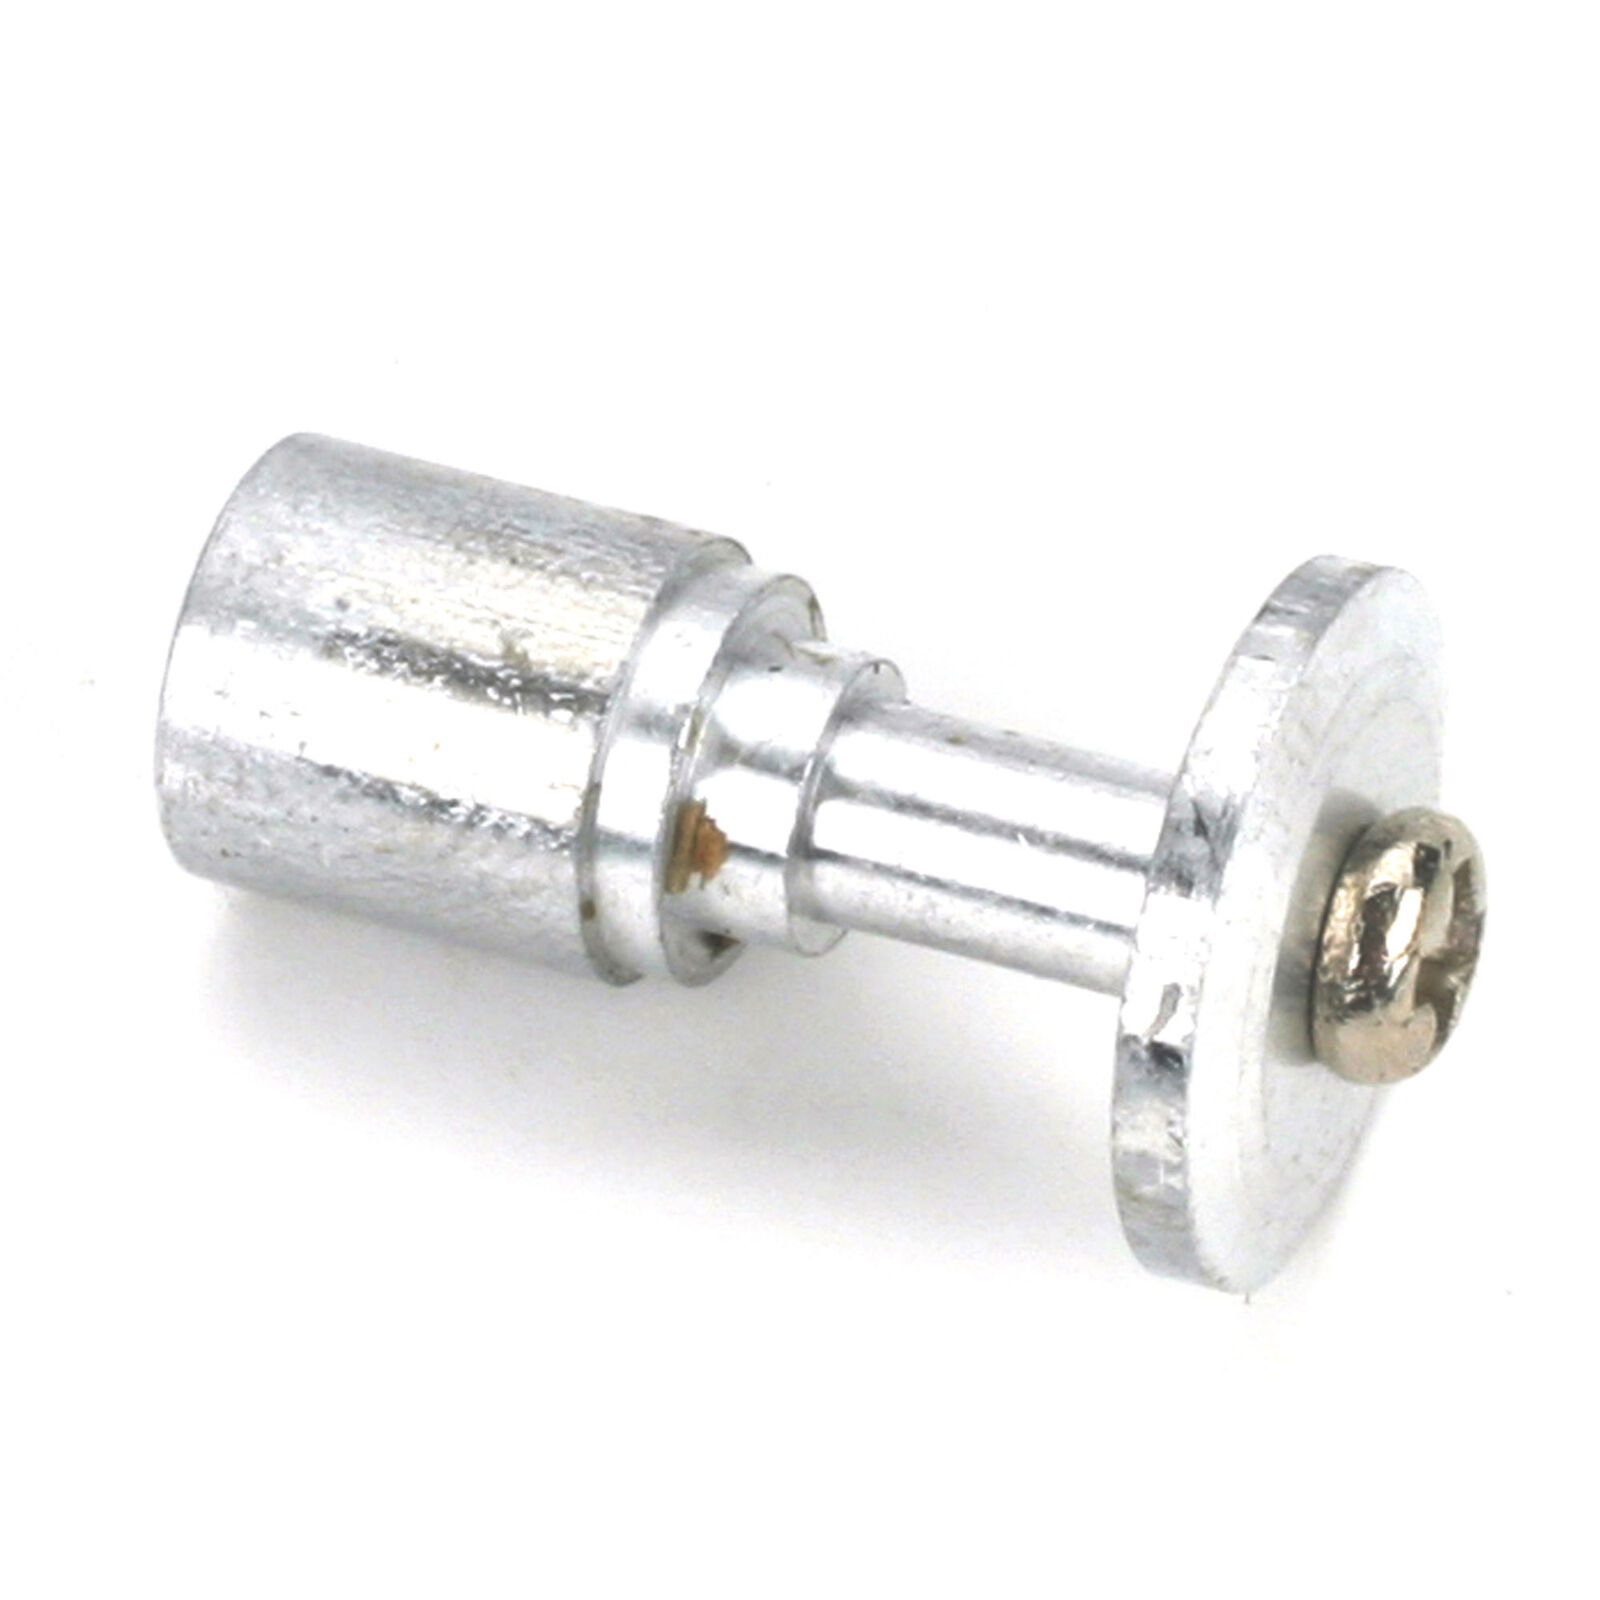 Prop Adapter (Flat) with Setscrew, 2mm